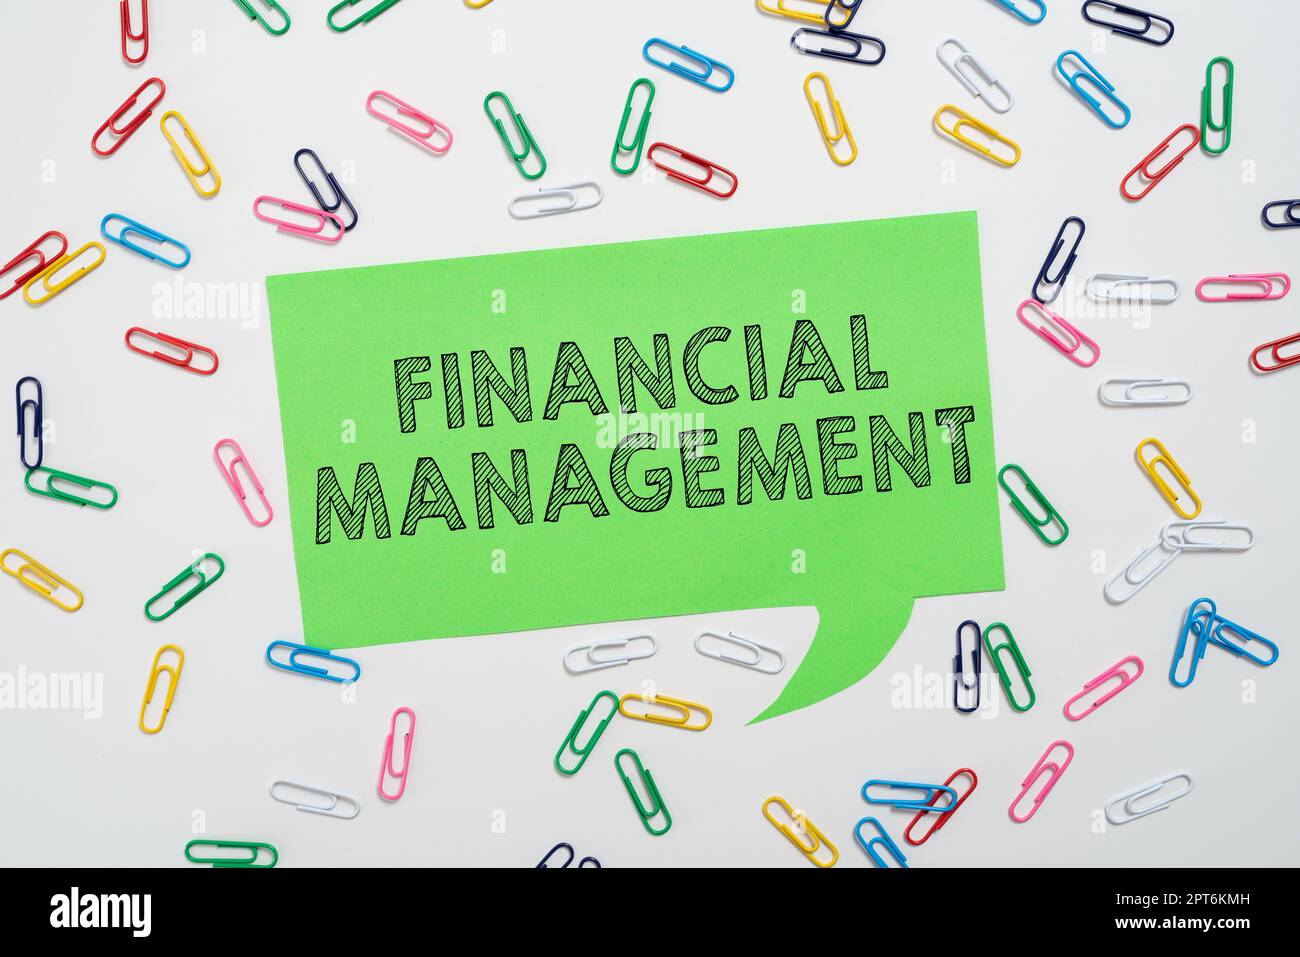 Text sign showing Financial Management, Business approach efficient and effective way to Manage Money and Funds Stock Photo